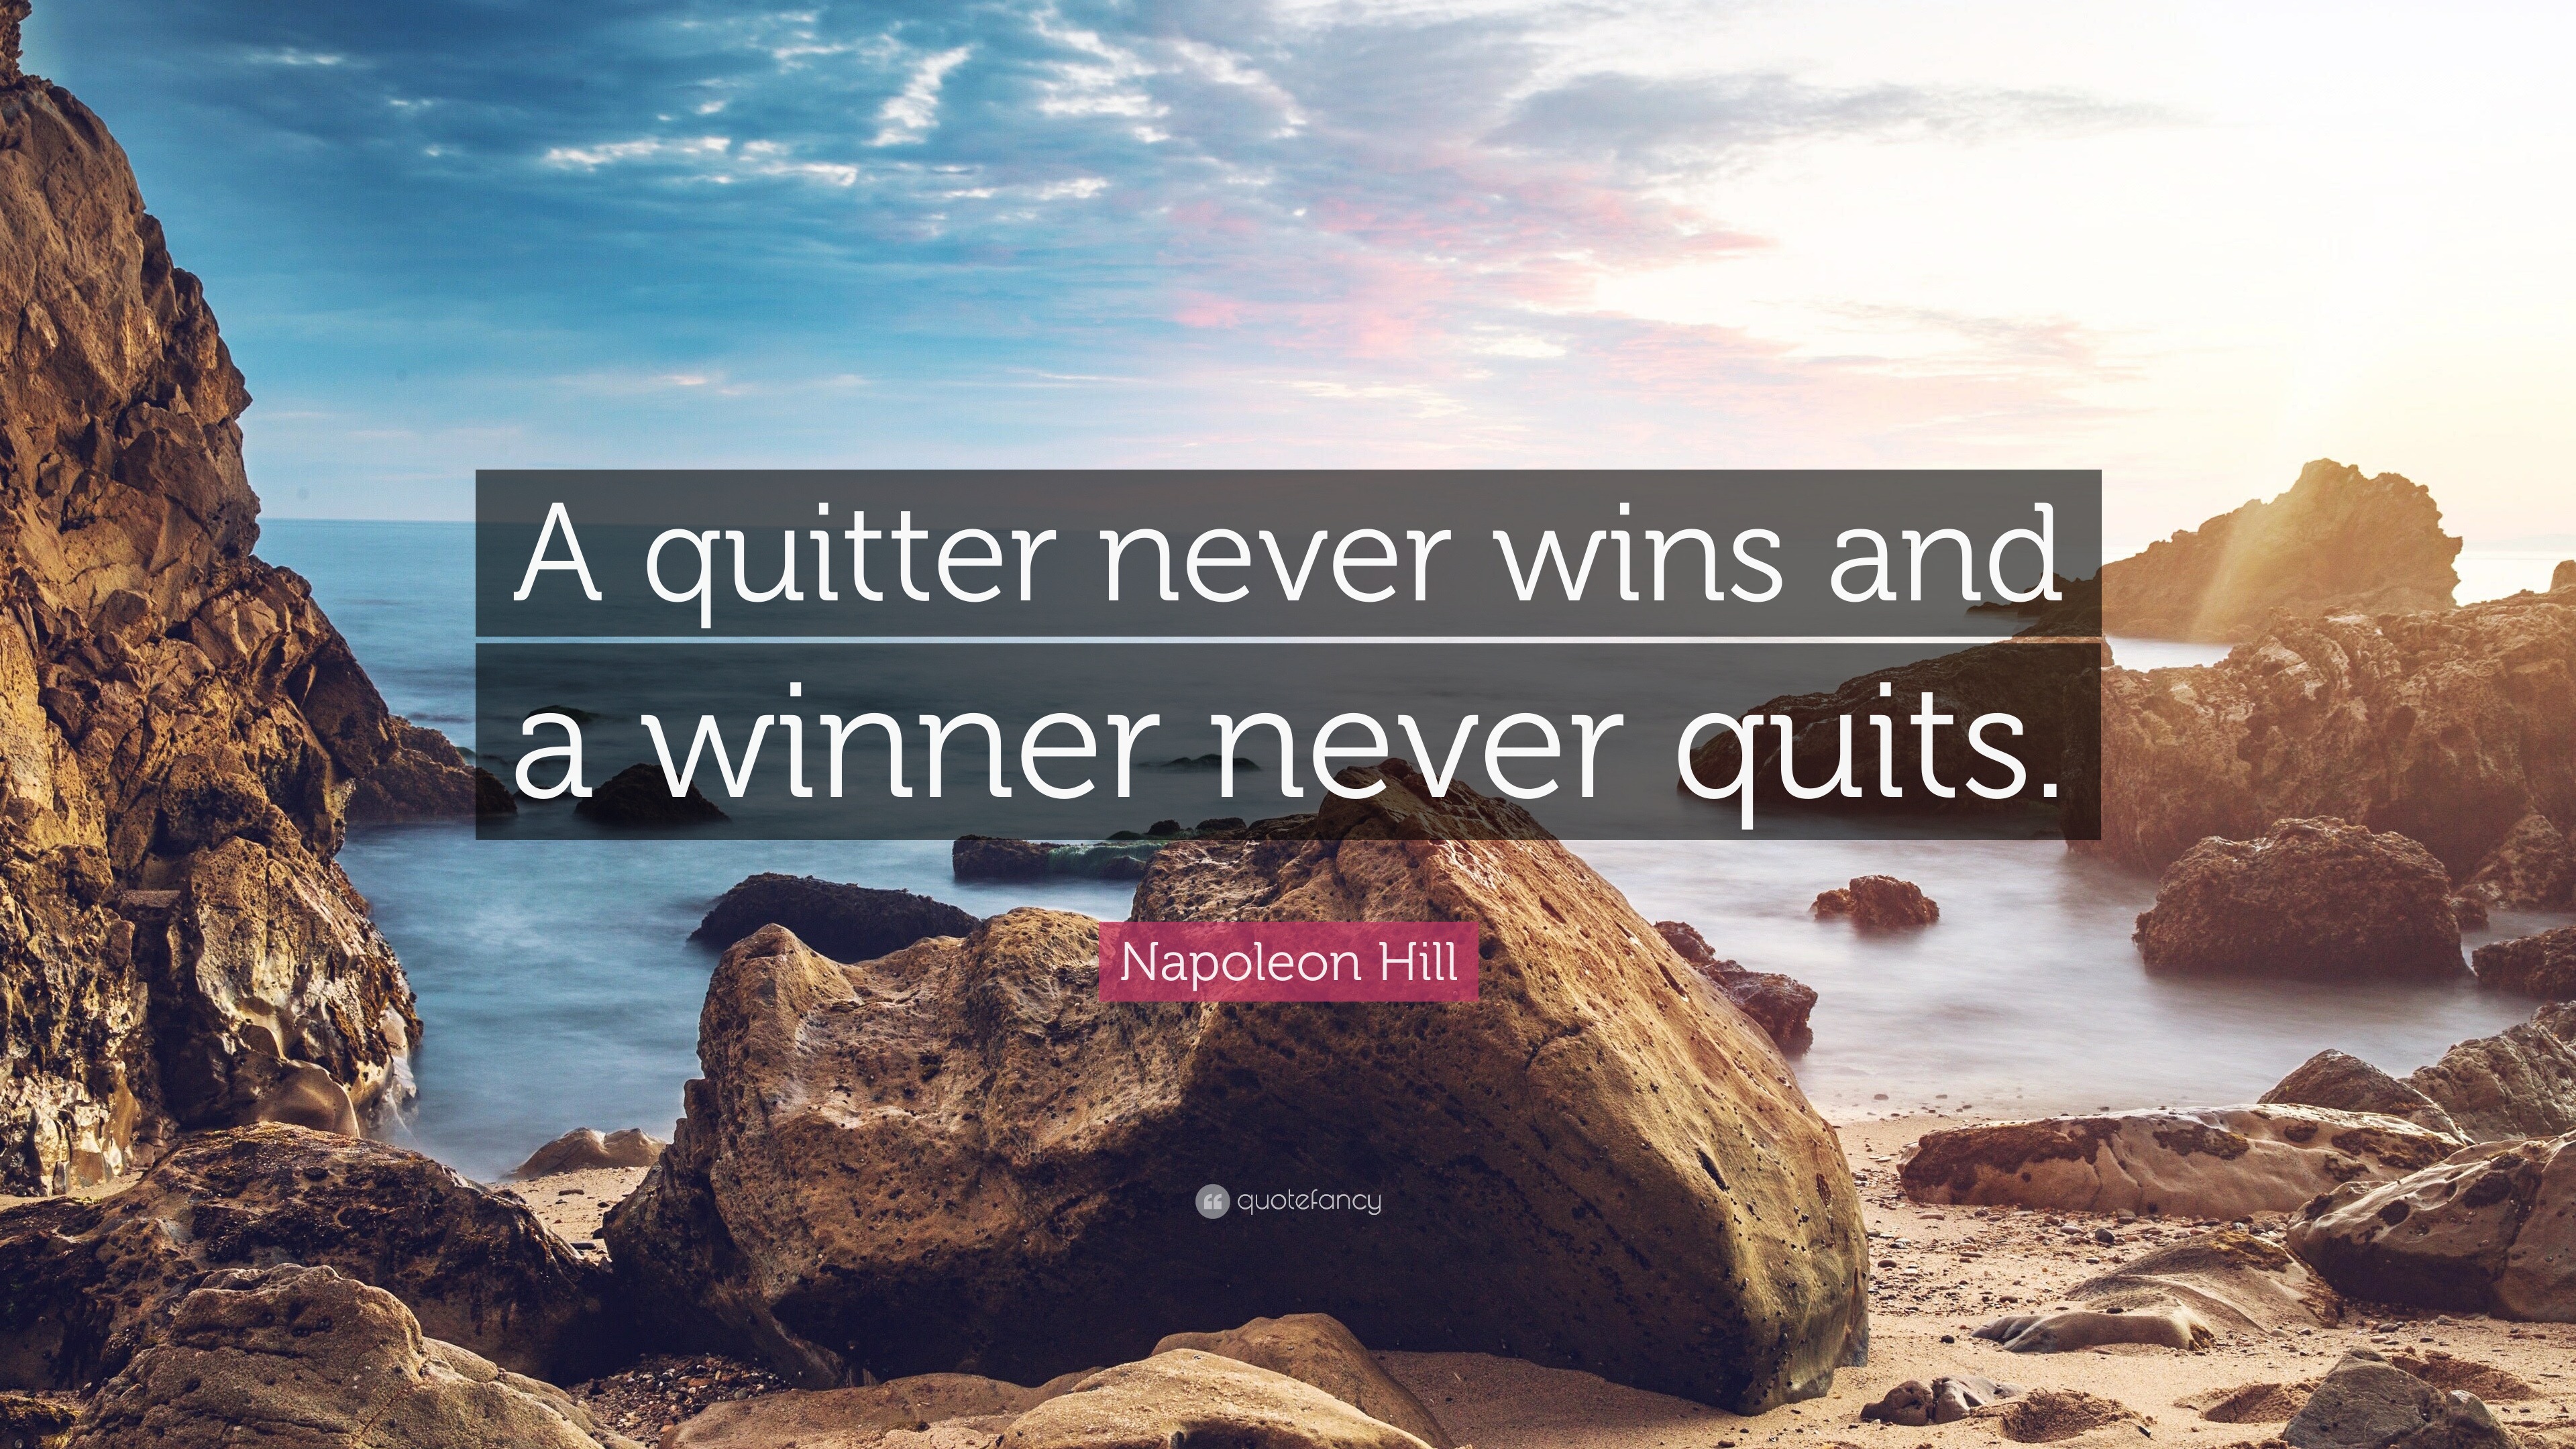 a winner never quits and a quitter never wins song